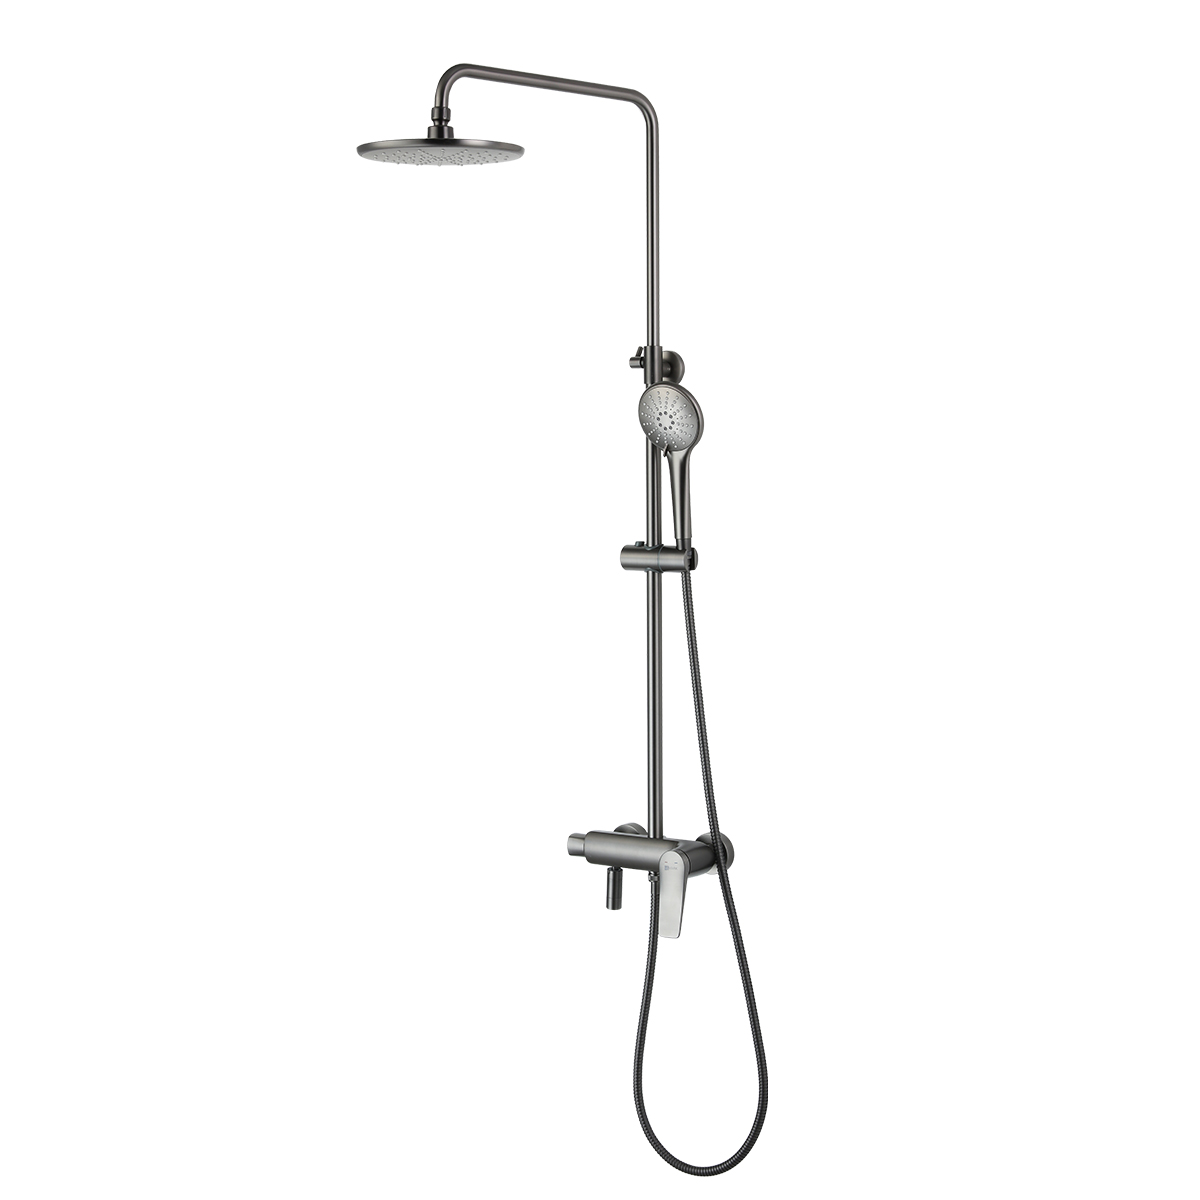 LM3762GM Bath and shower faucet with adjustable rod height, swivel spout and «Tropical rain» shower head